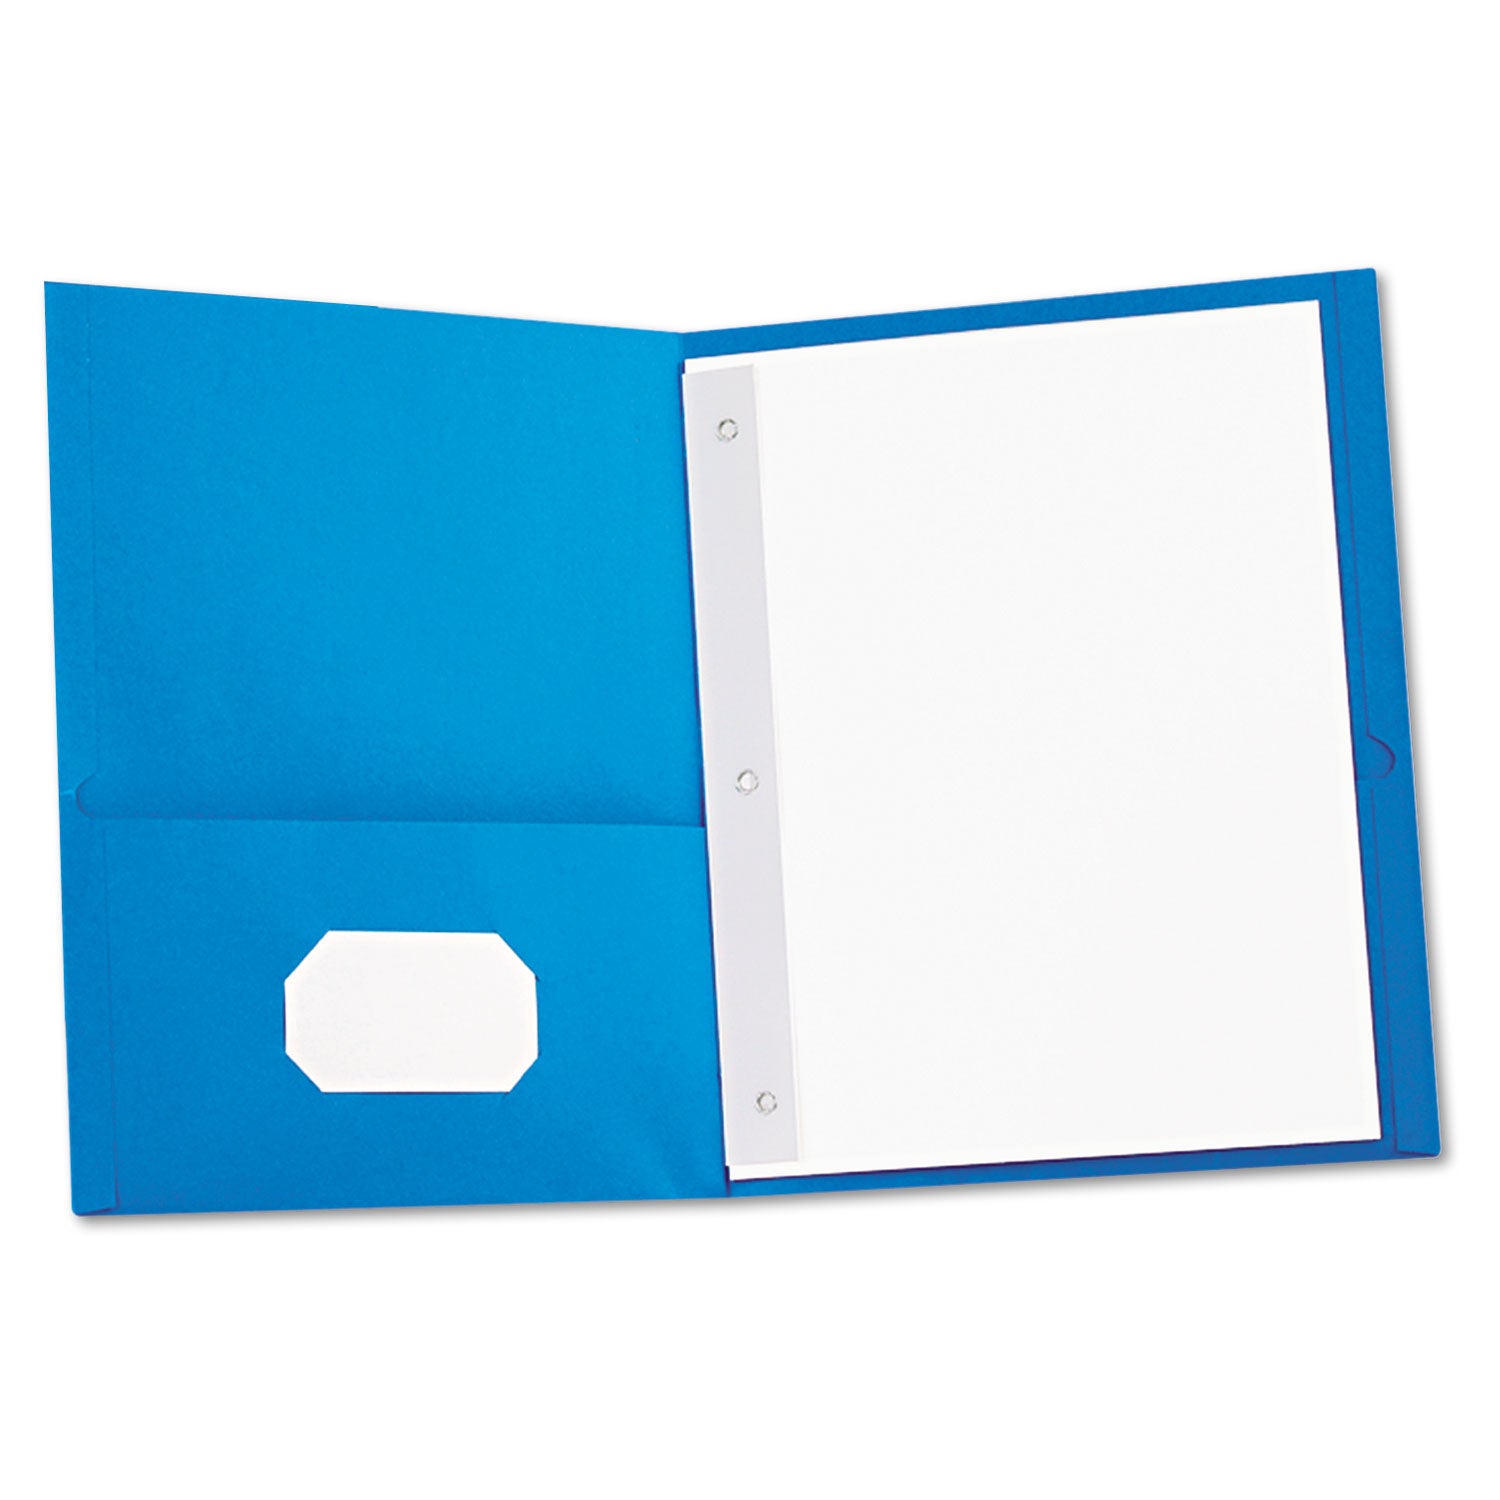 Two-Pocket Portfolios with Tang Fasteners, 0.5" Capacity, 11 x 8.5, Light Blue, 25/Box - 